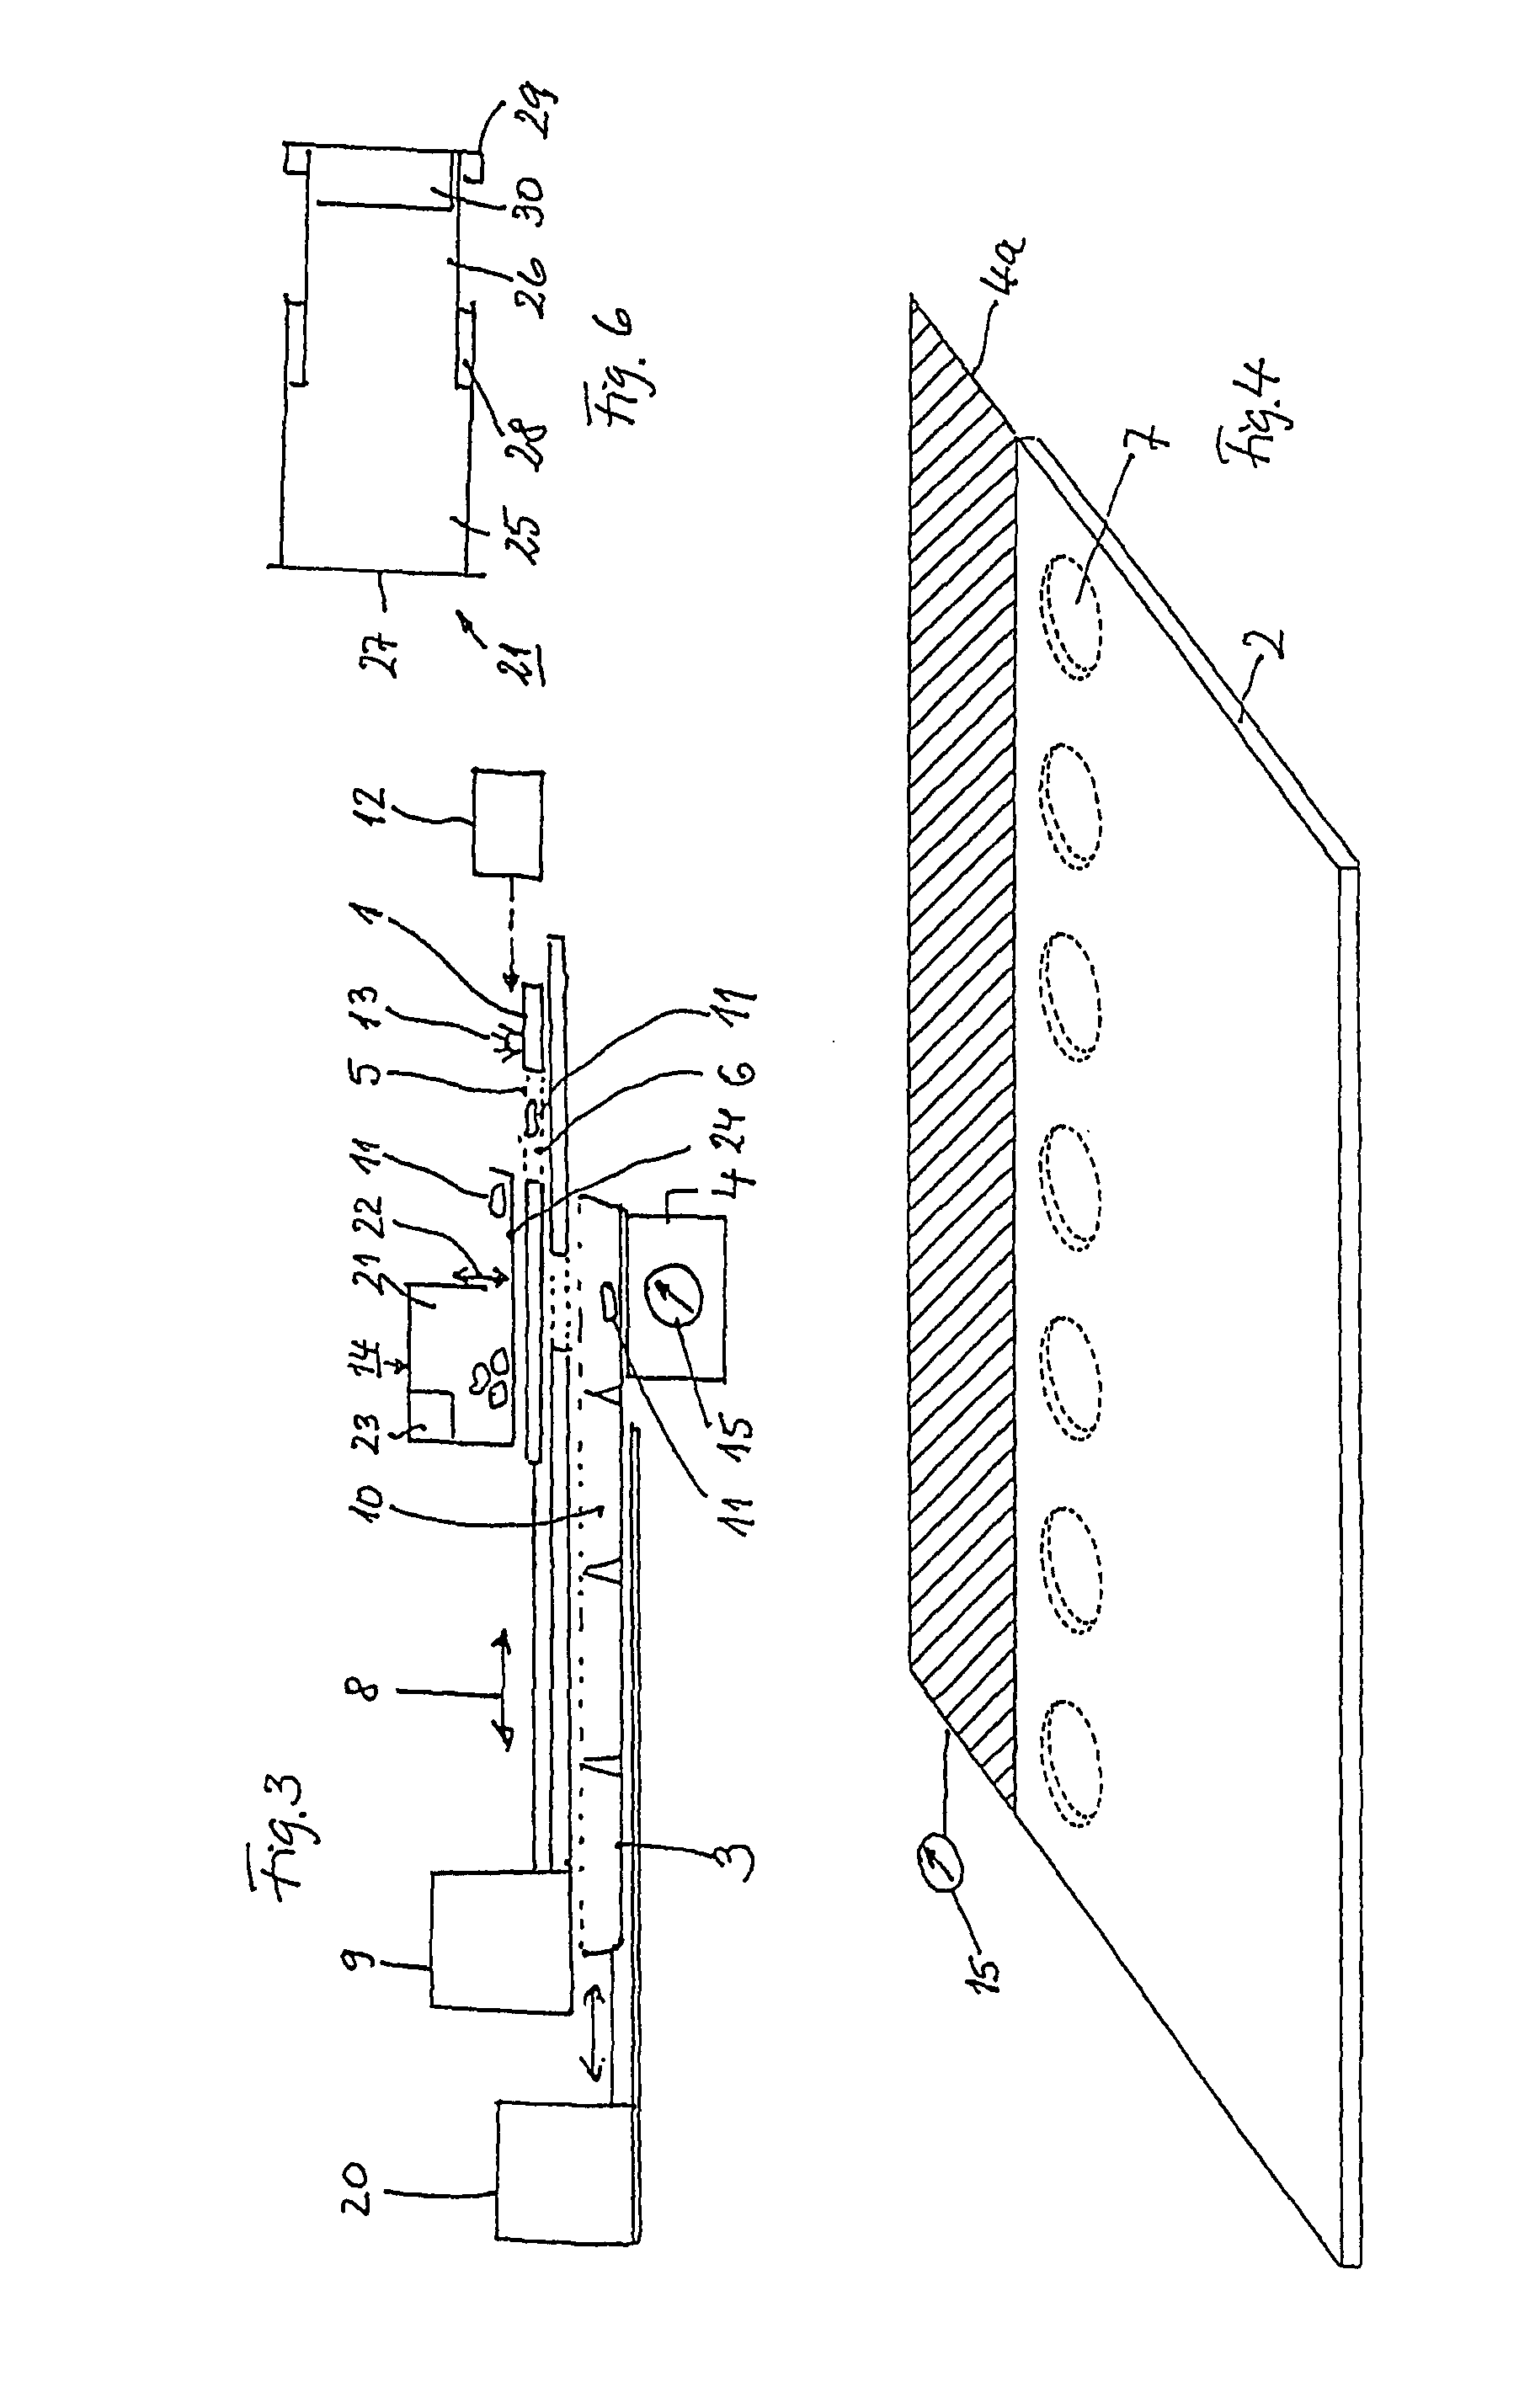 Device for individual packing of tablets according to a multi-dose system